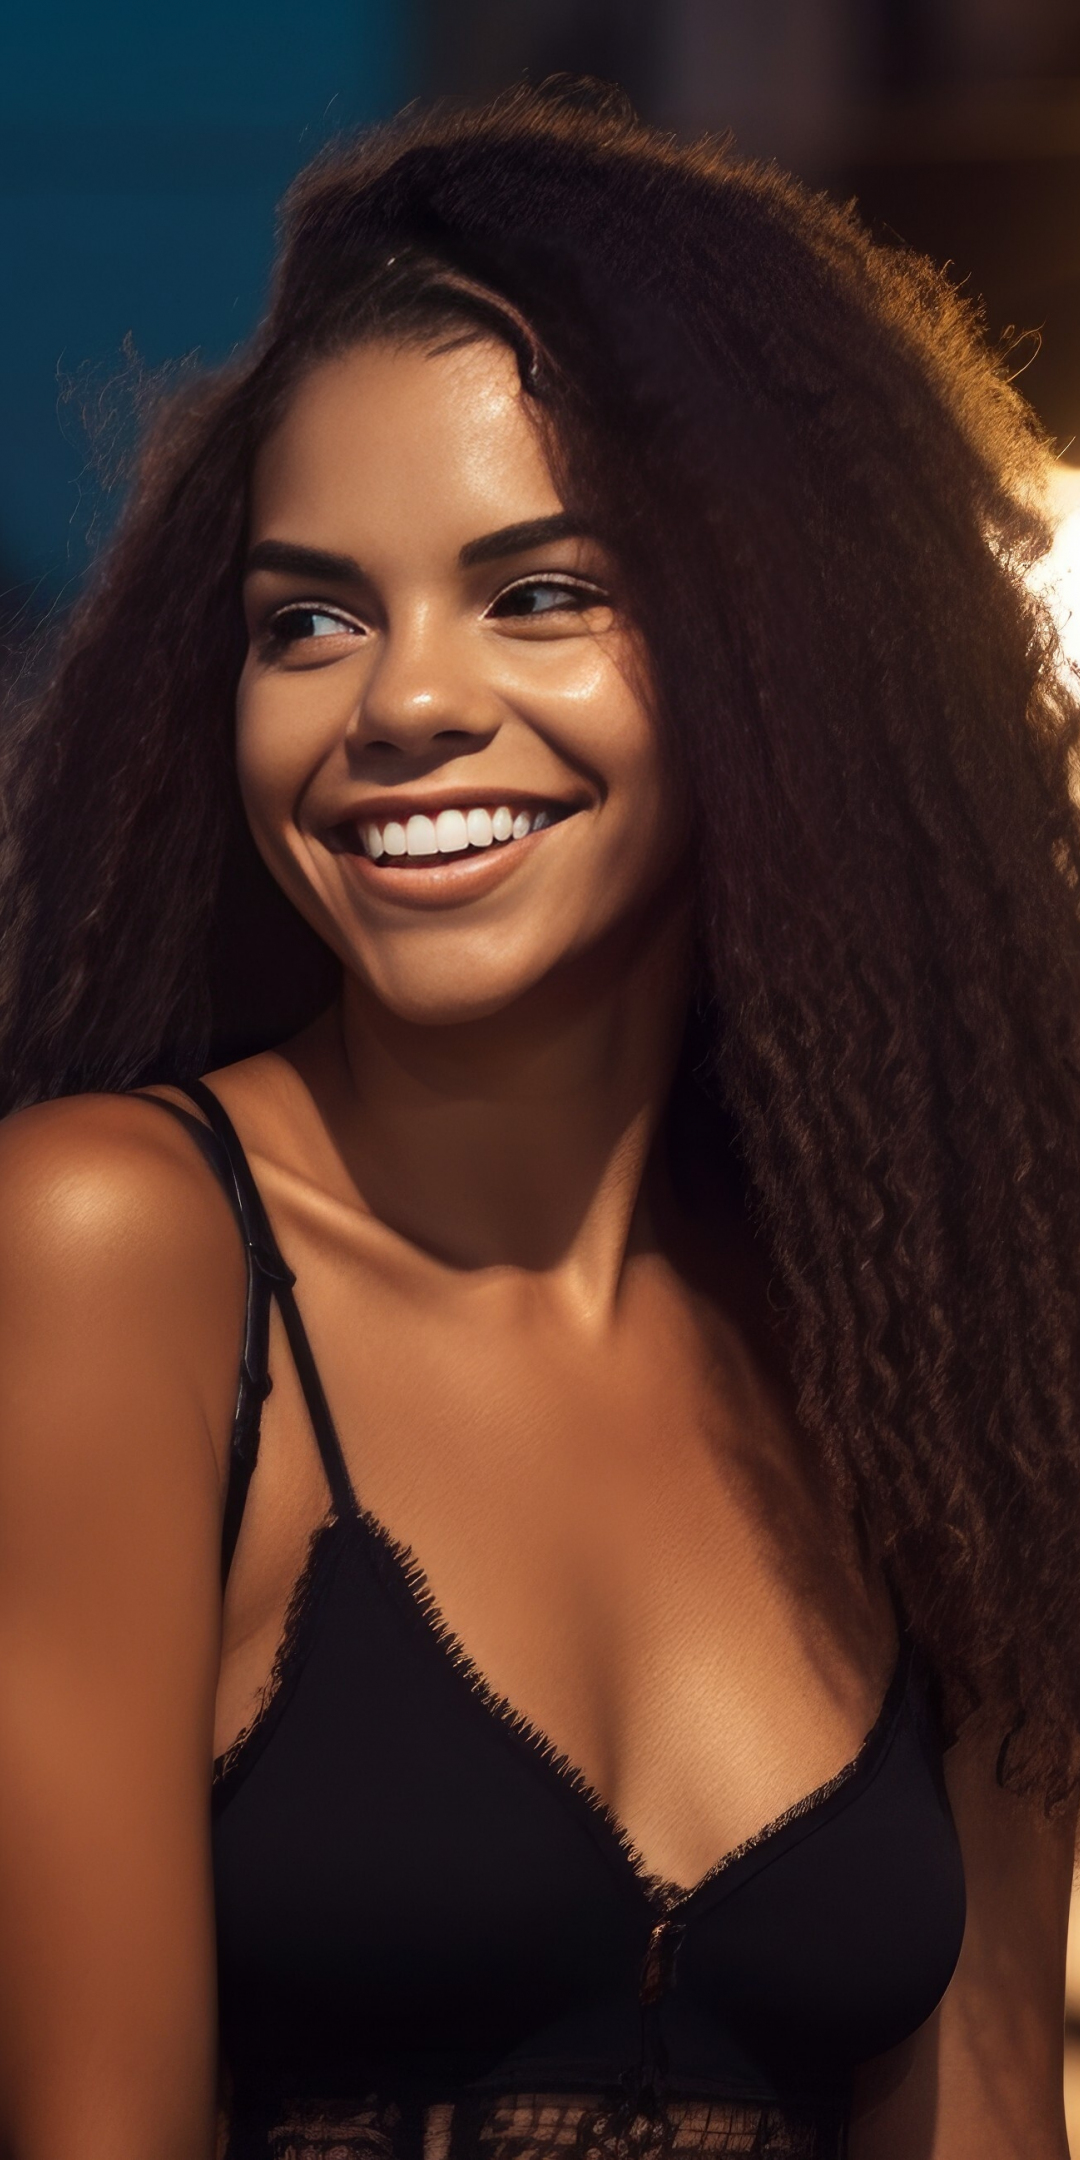 Teen girl, pretty smile and curly hair, model, 1080x2160 wallpaper